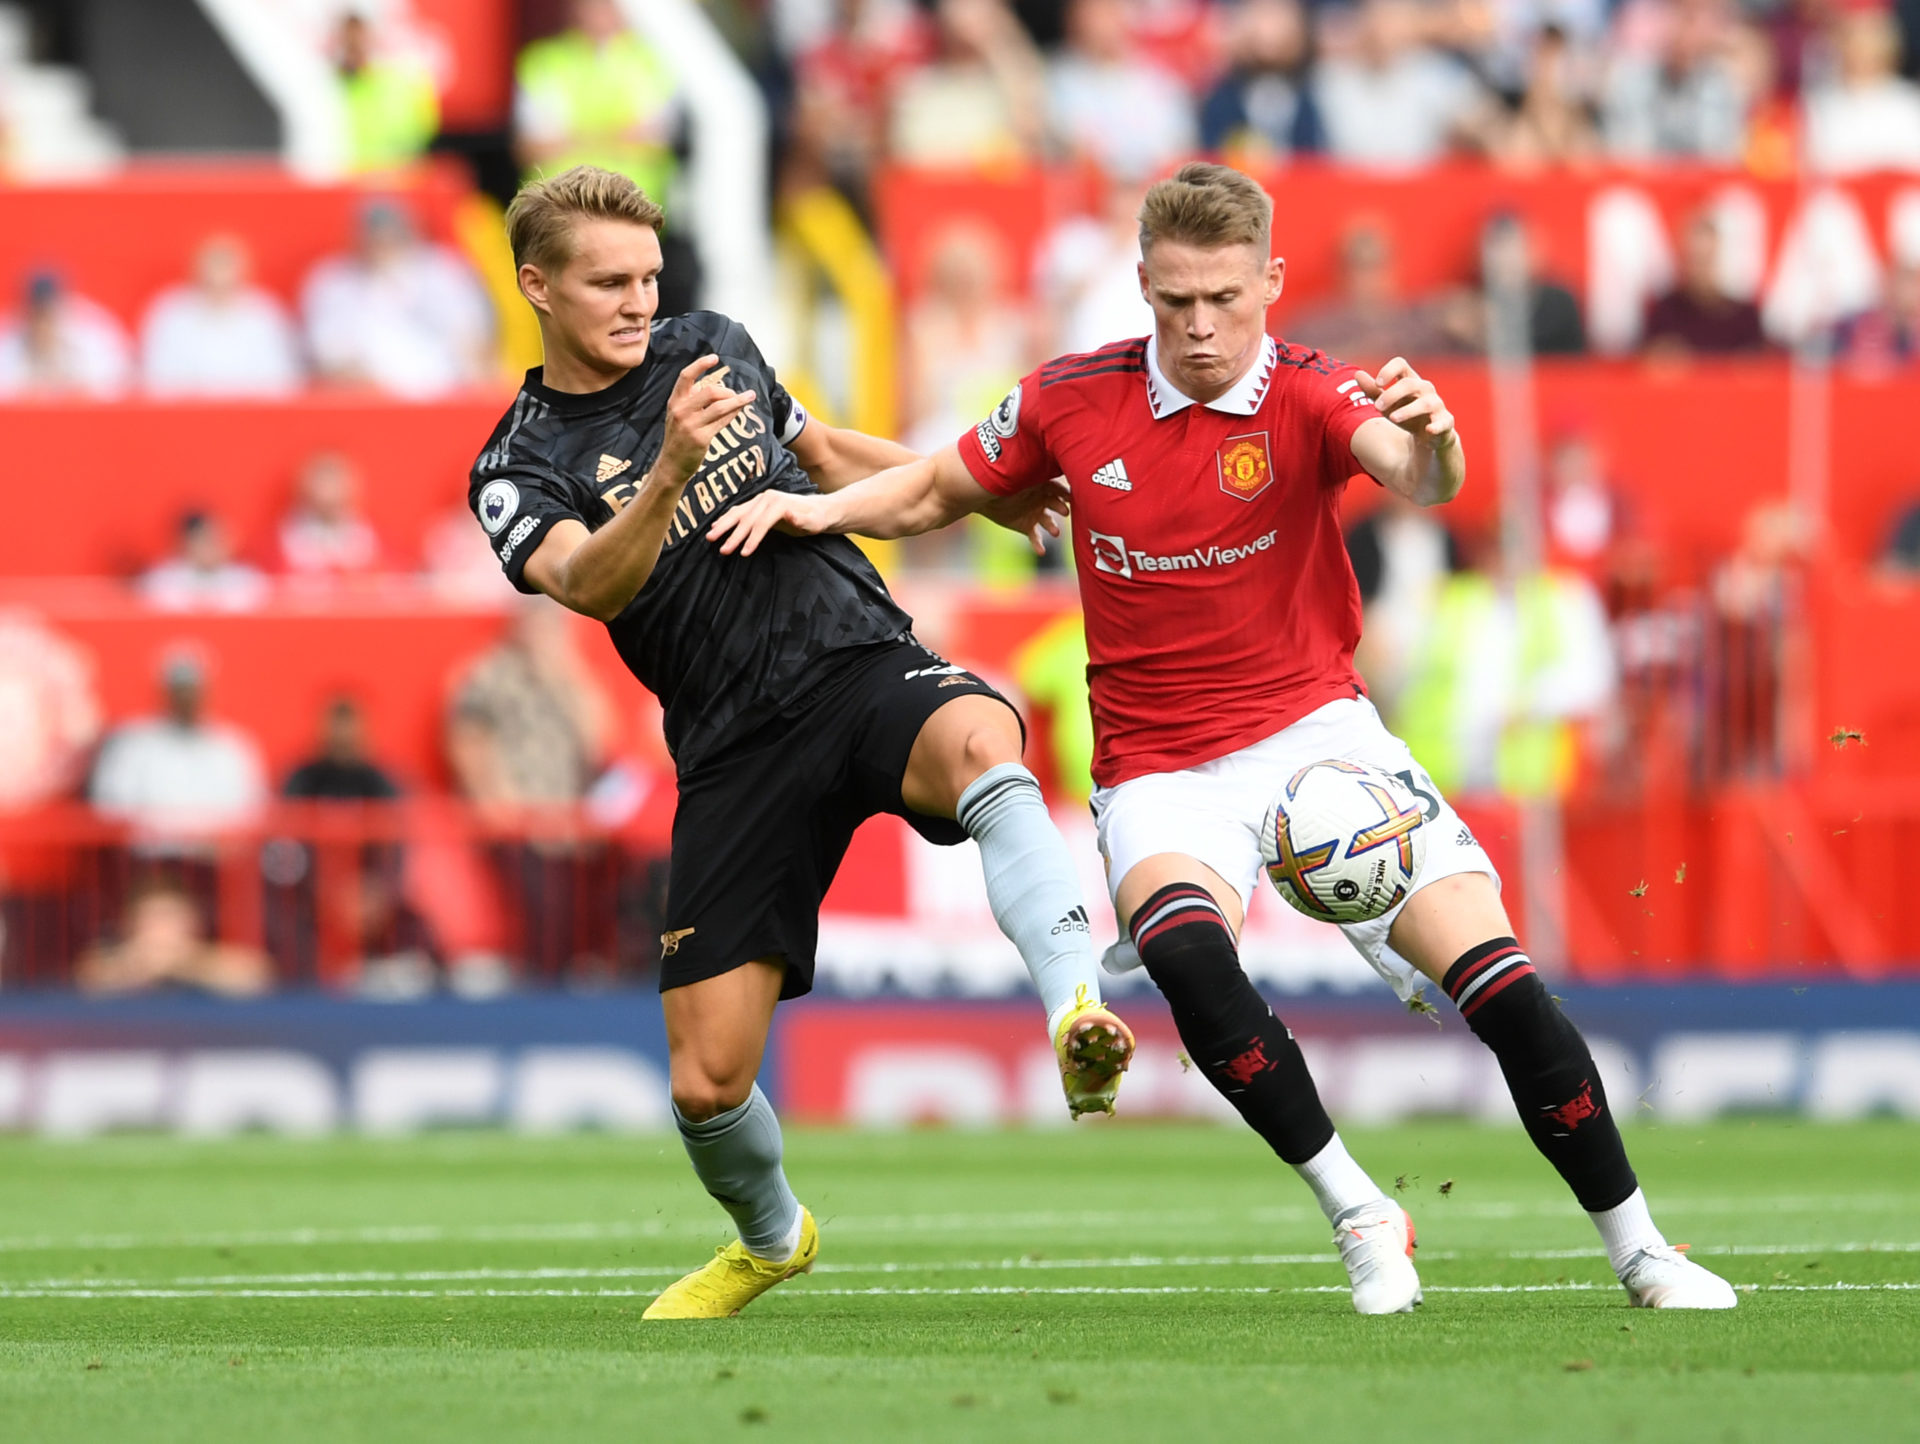 Scott McTominay completed 100% of his passes in Manchester United win